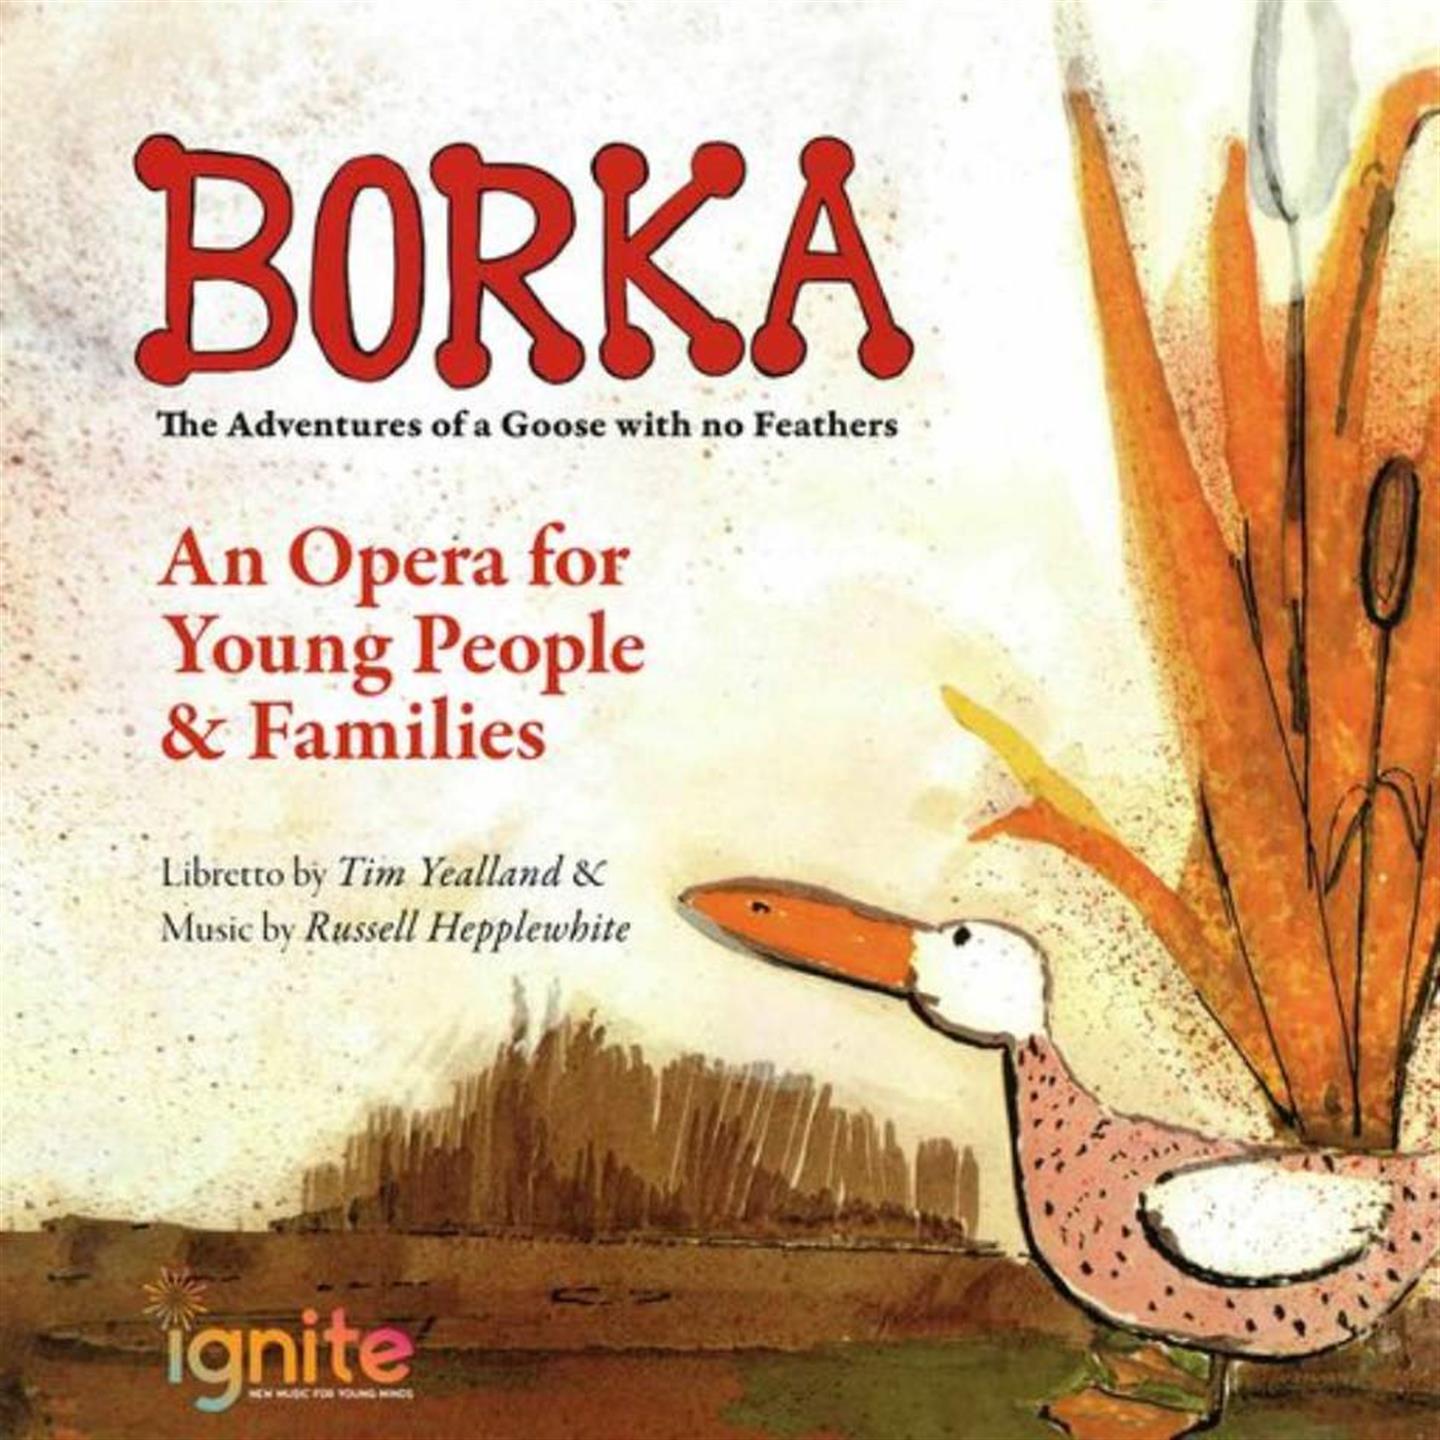 BORKA: The Adventures of a Goose with no Feathers